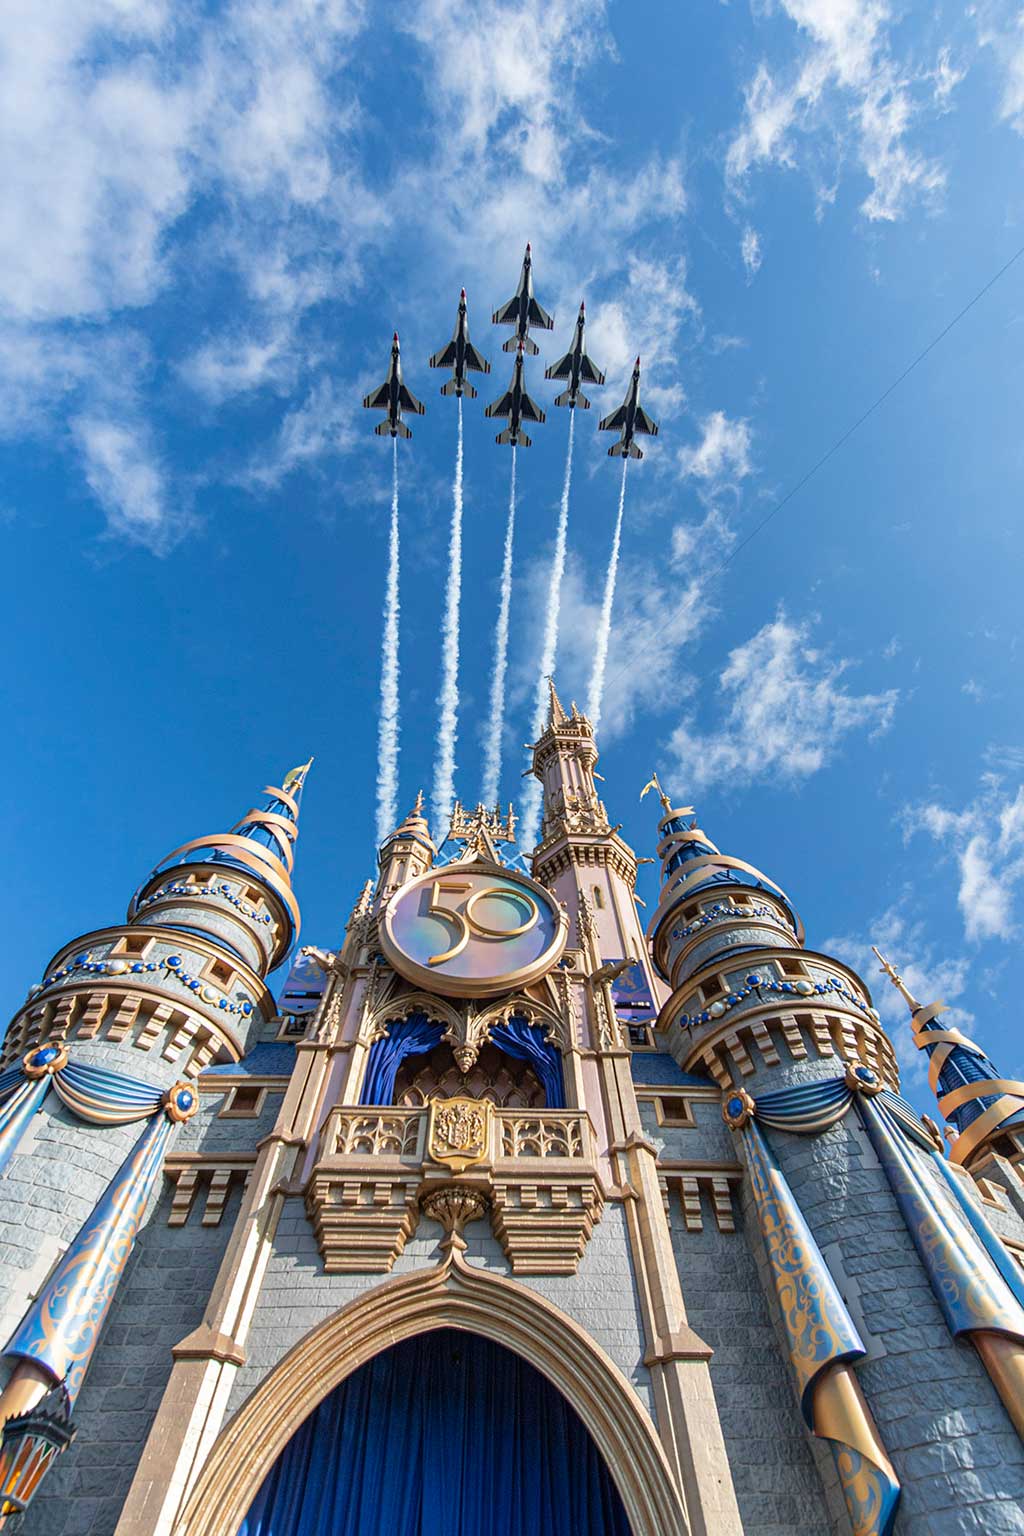  U.S. Air Force Thunderbirds fly over Cinderella Castle at Magic Kingdom Park at Walt Disney World Resort in Lake Buena Vista, Fla., Oct. 27, 2022, as a prelude to the beginning of National Veterans and Military Families Month in November. (Abigail Nilsson, Photographer) 